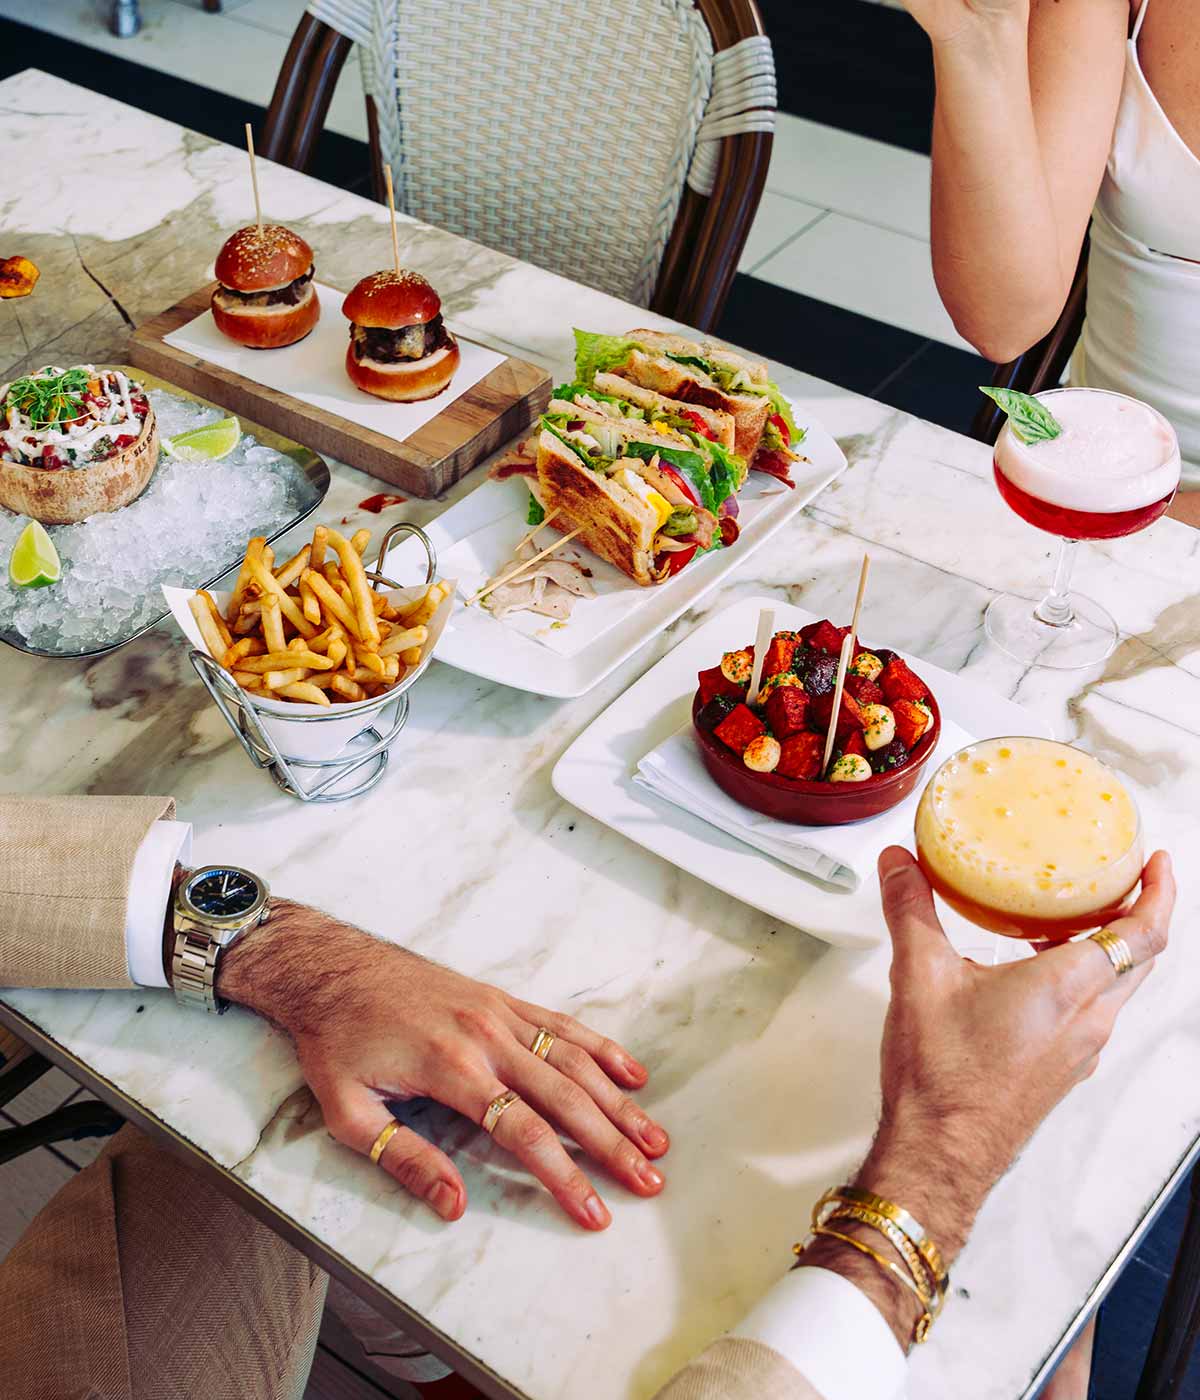 A spread of food including french fries, sandwiches and cocktails, being eaten by two people